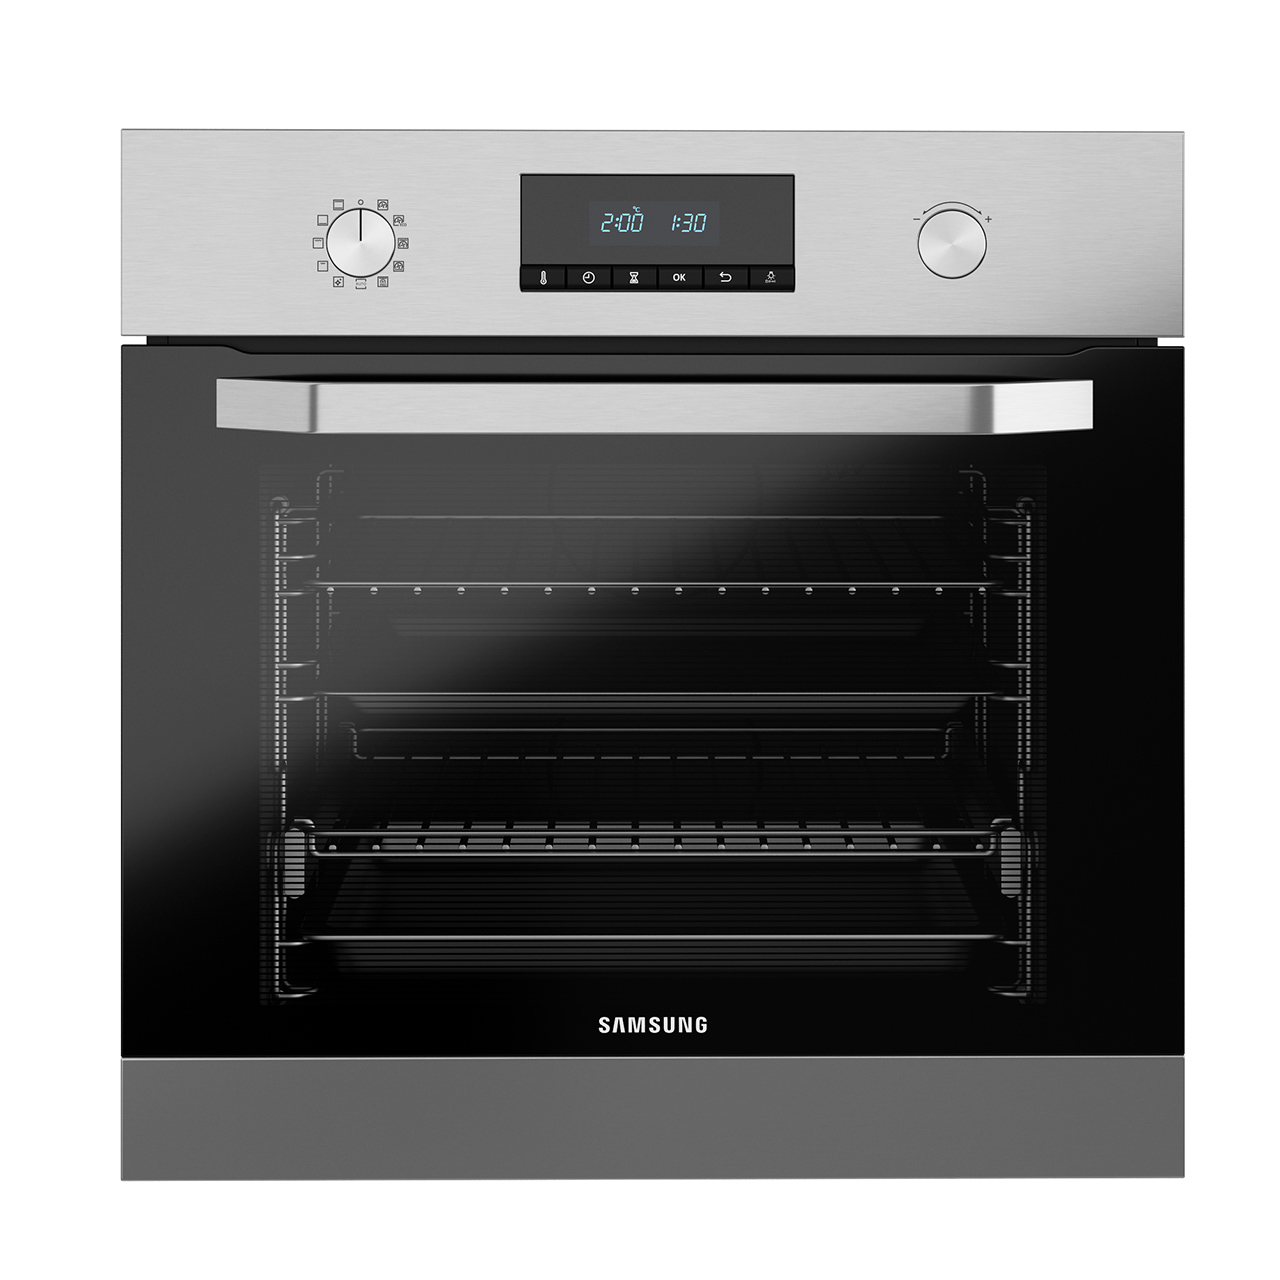 Built-in Oven With Dual Fan 68L NV70K3370RS by Samsung